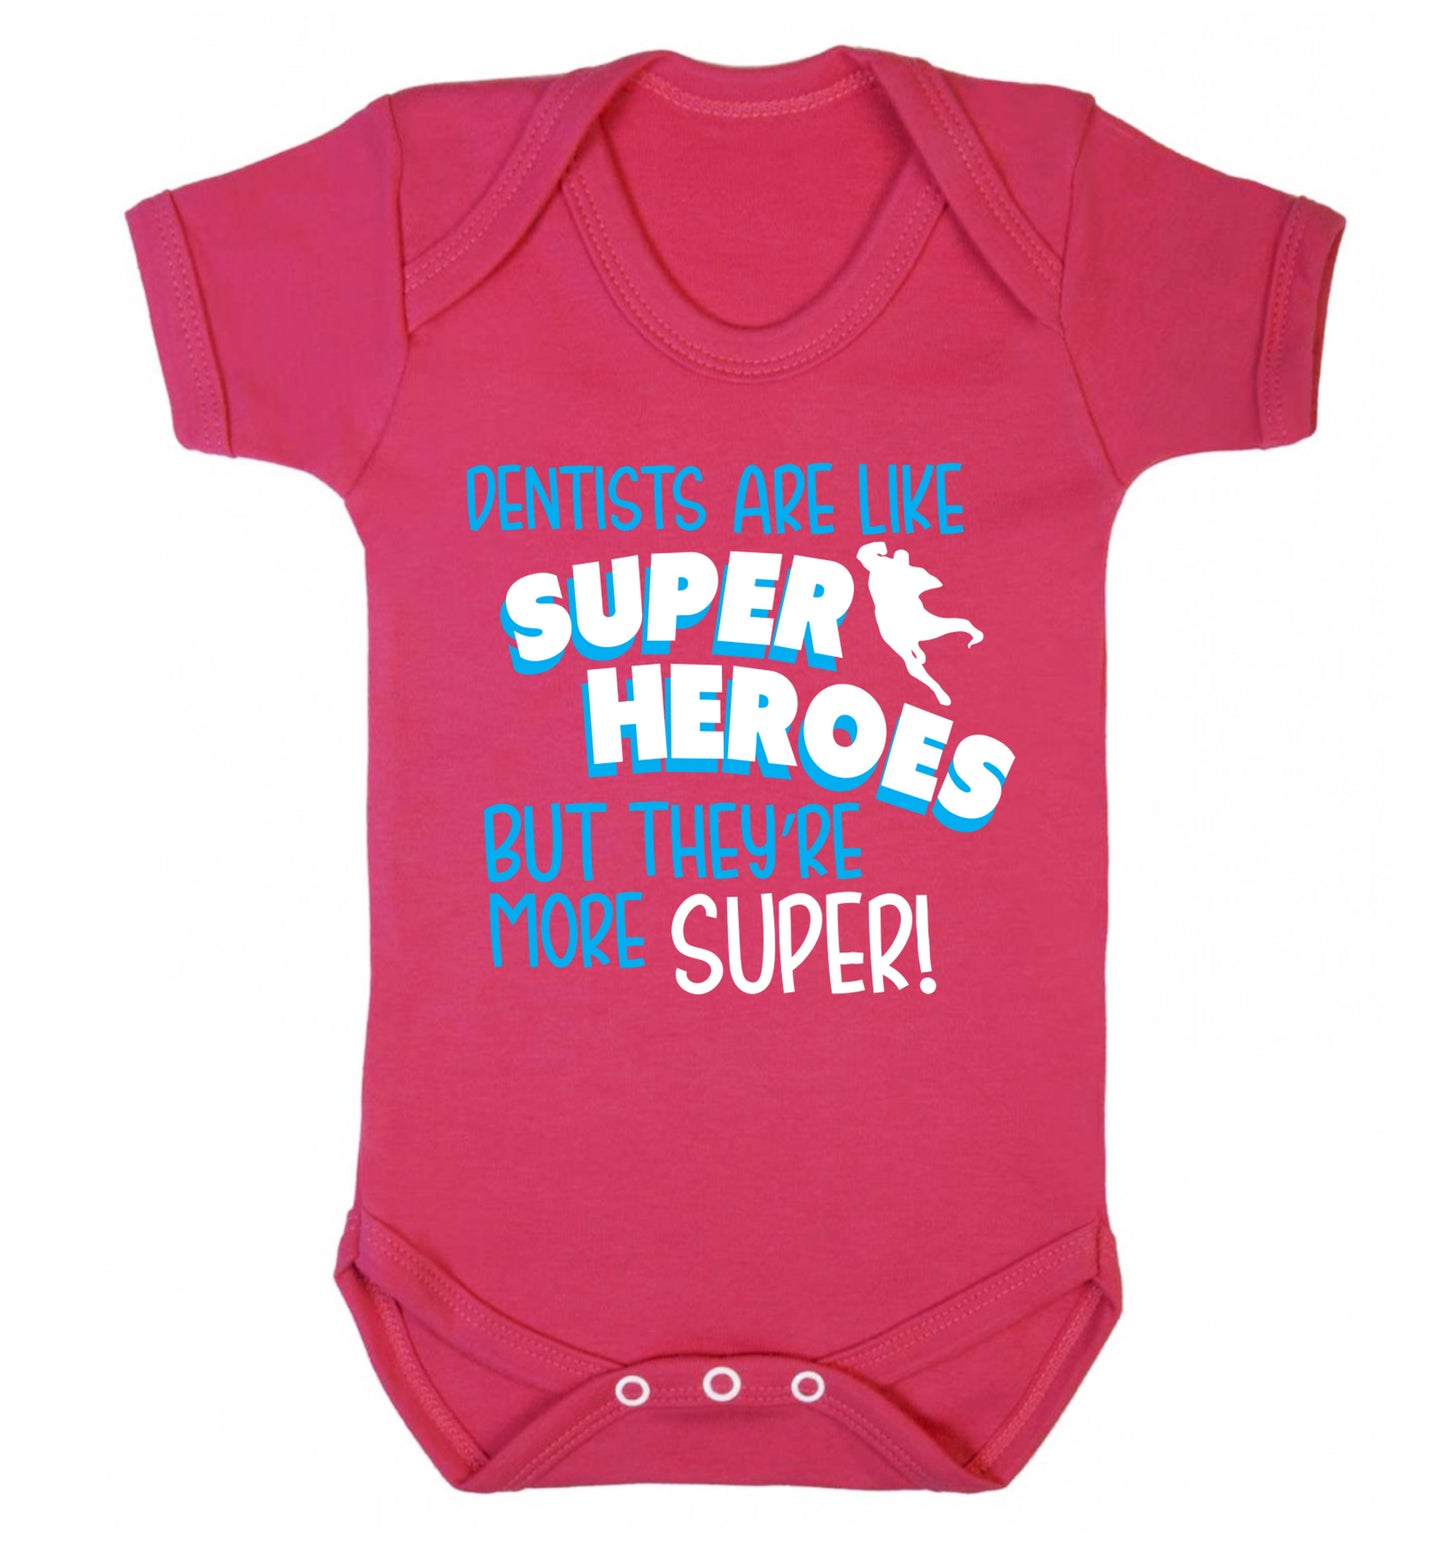 Dentists are like superheros but they're more super Baby Vest dark pink 18-24 months